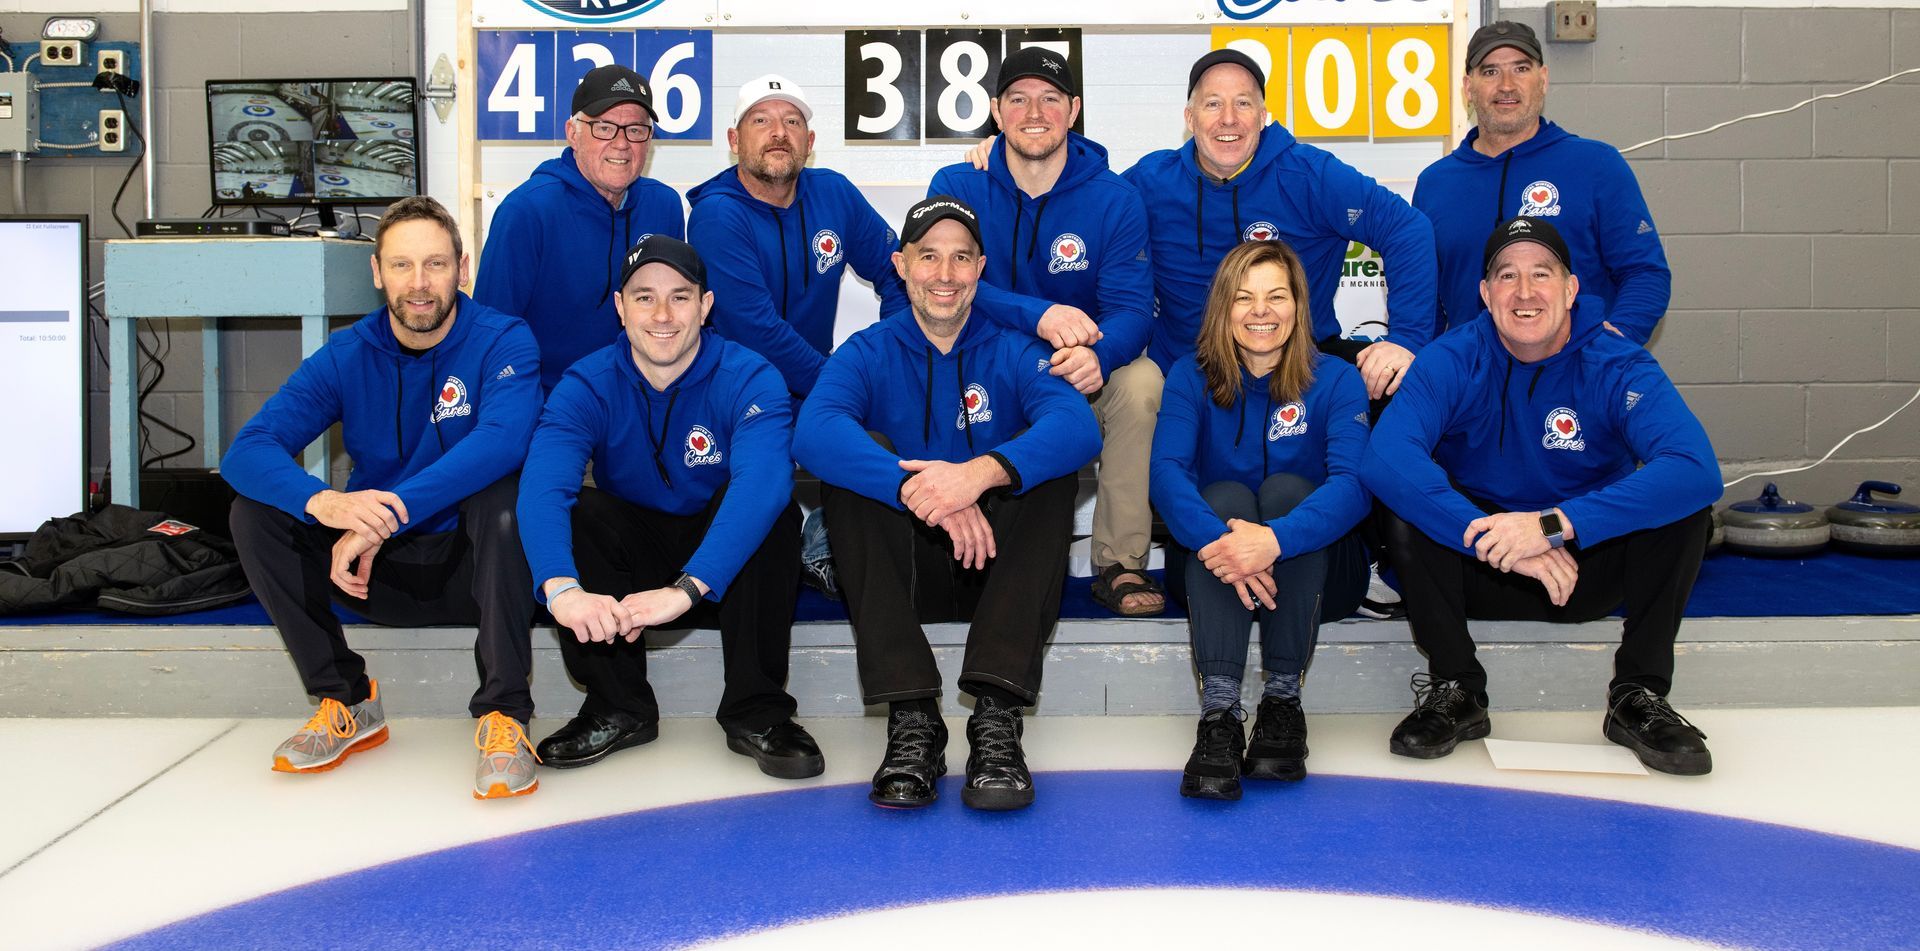 
World's Longest Curling Game, world record in Fredericton, Canada